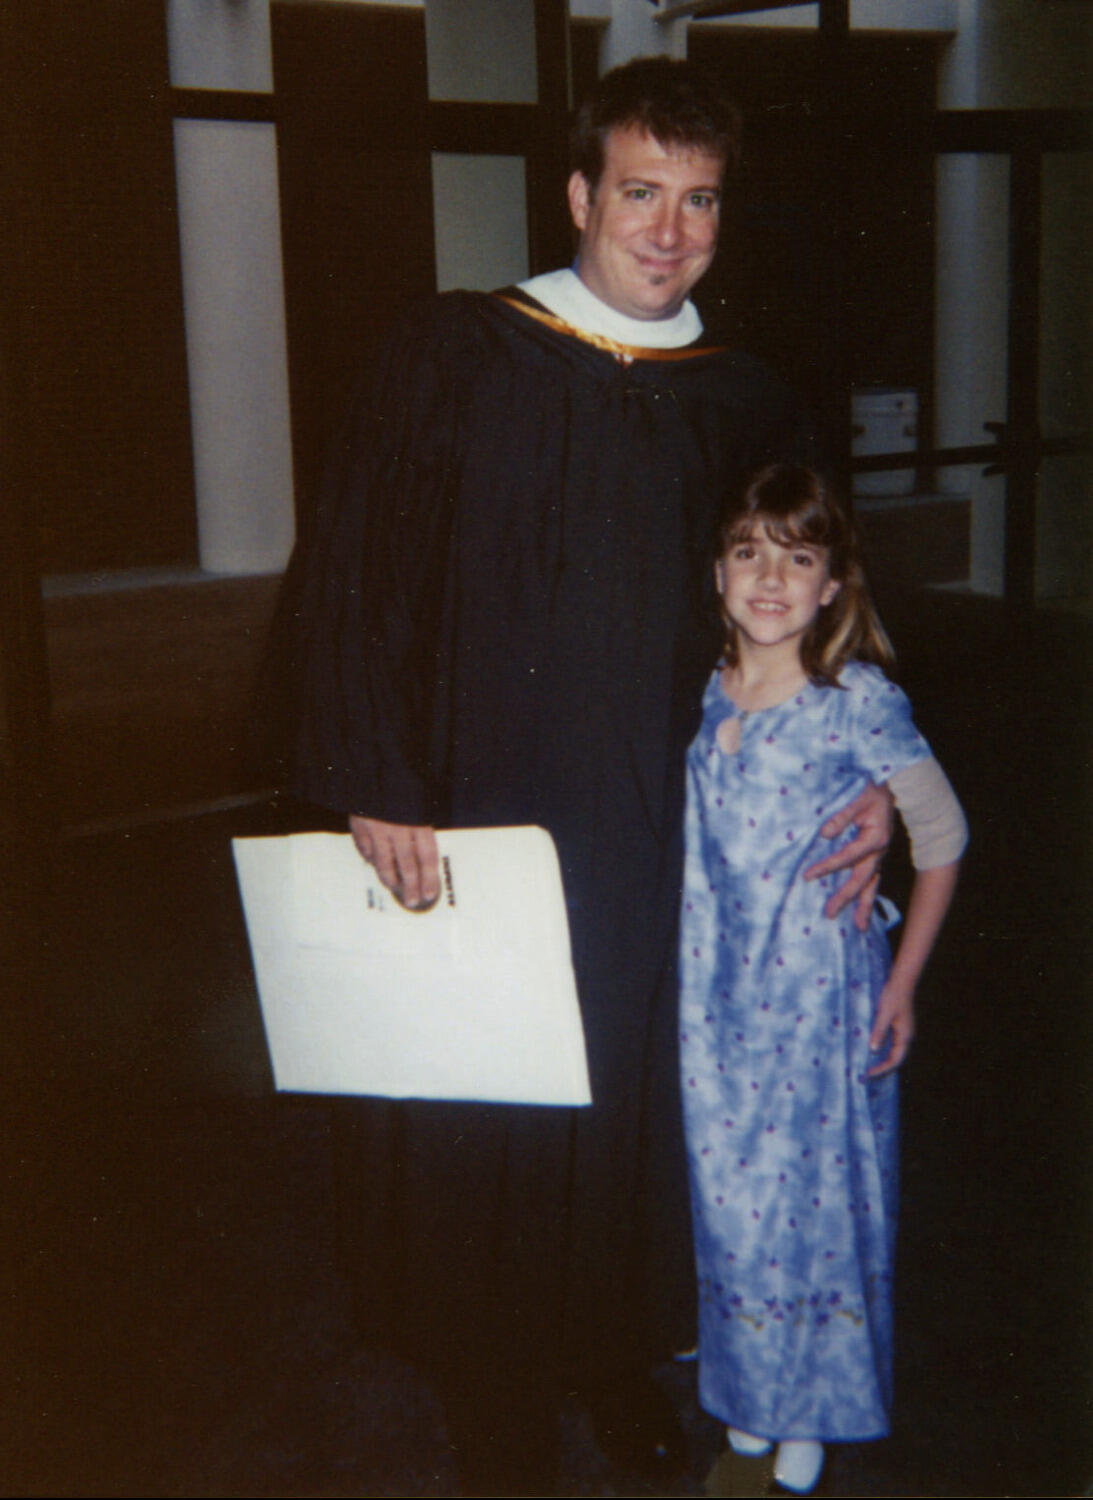 Chris Saladino, a political science instructor at VCU, with his daughter Lucy.